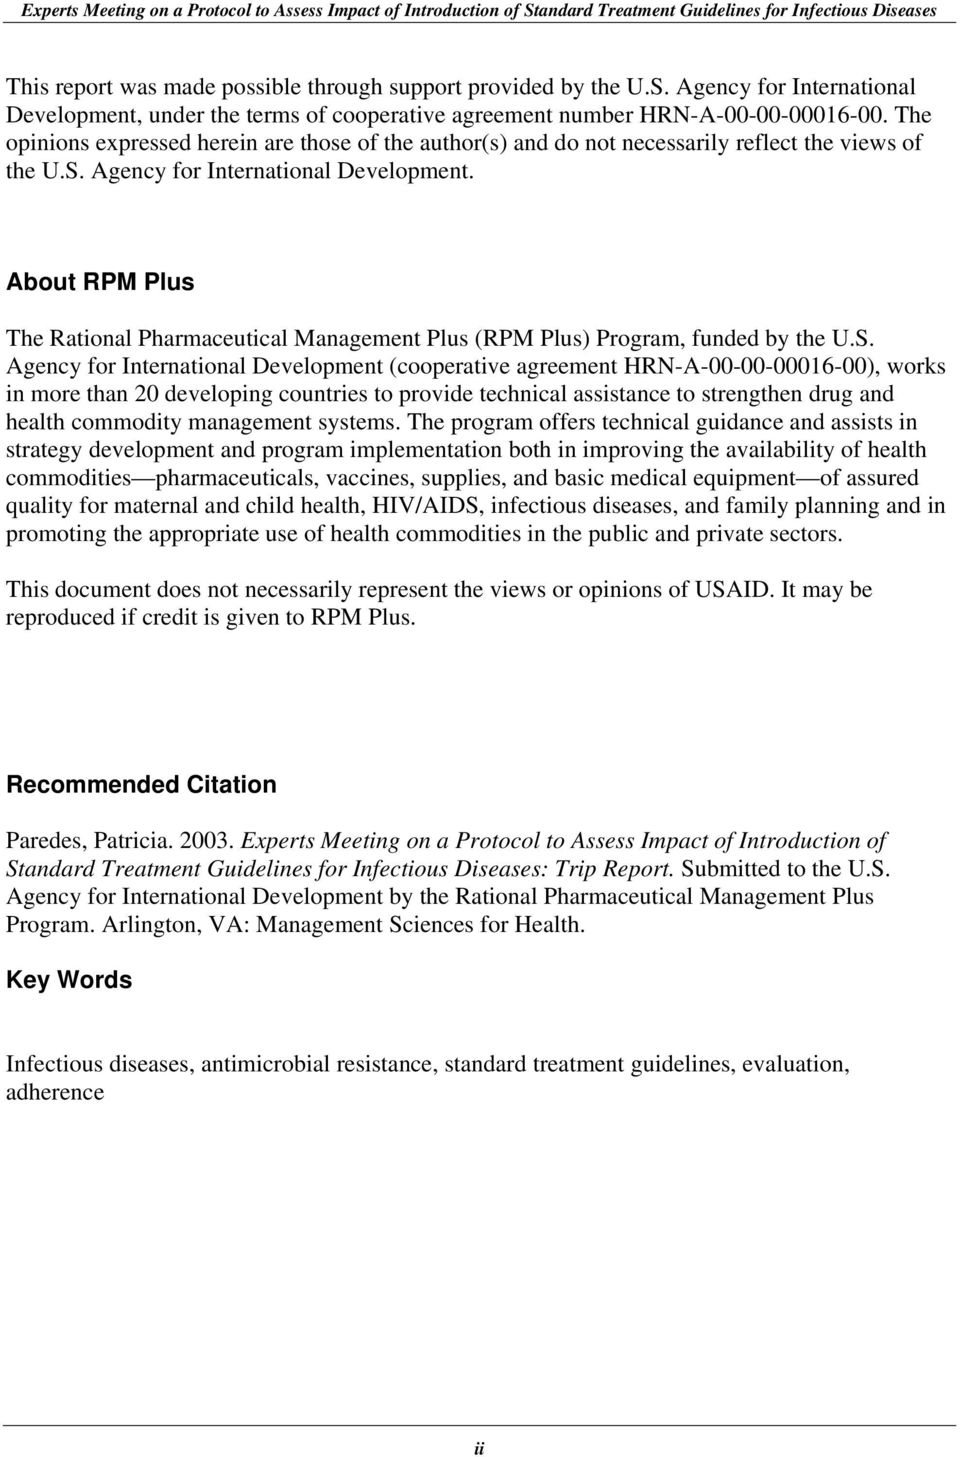 About RPM Plus The Rational Pharmaceutical Management Plus (RPM Plus) Program, funded by the U.S.